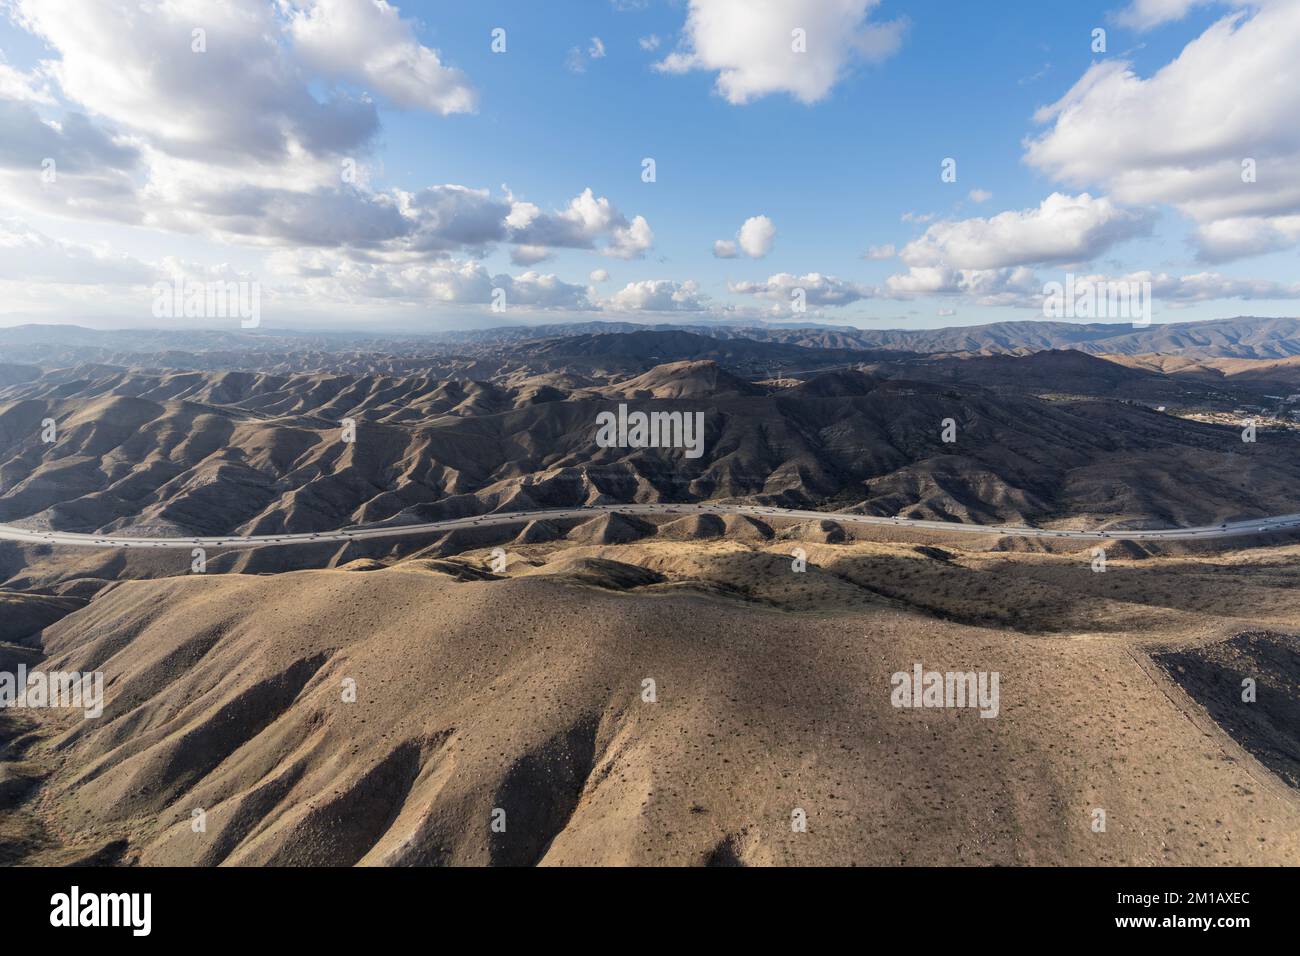 Aerial view of the 14 freeway between Santa Clarita and Agua Dulce in Los Angeles County, California. Stock Photo